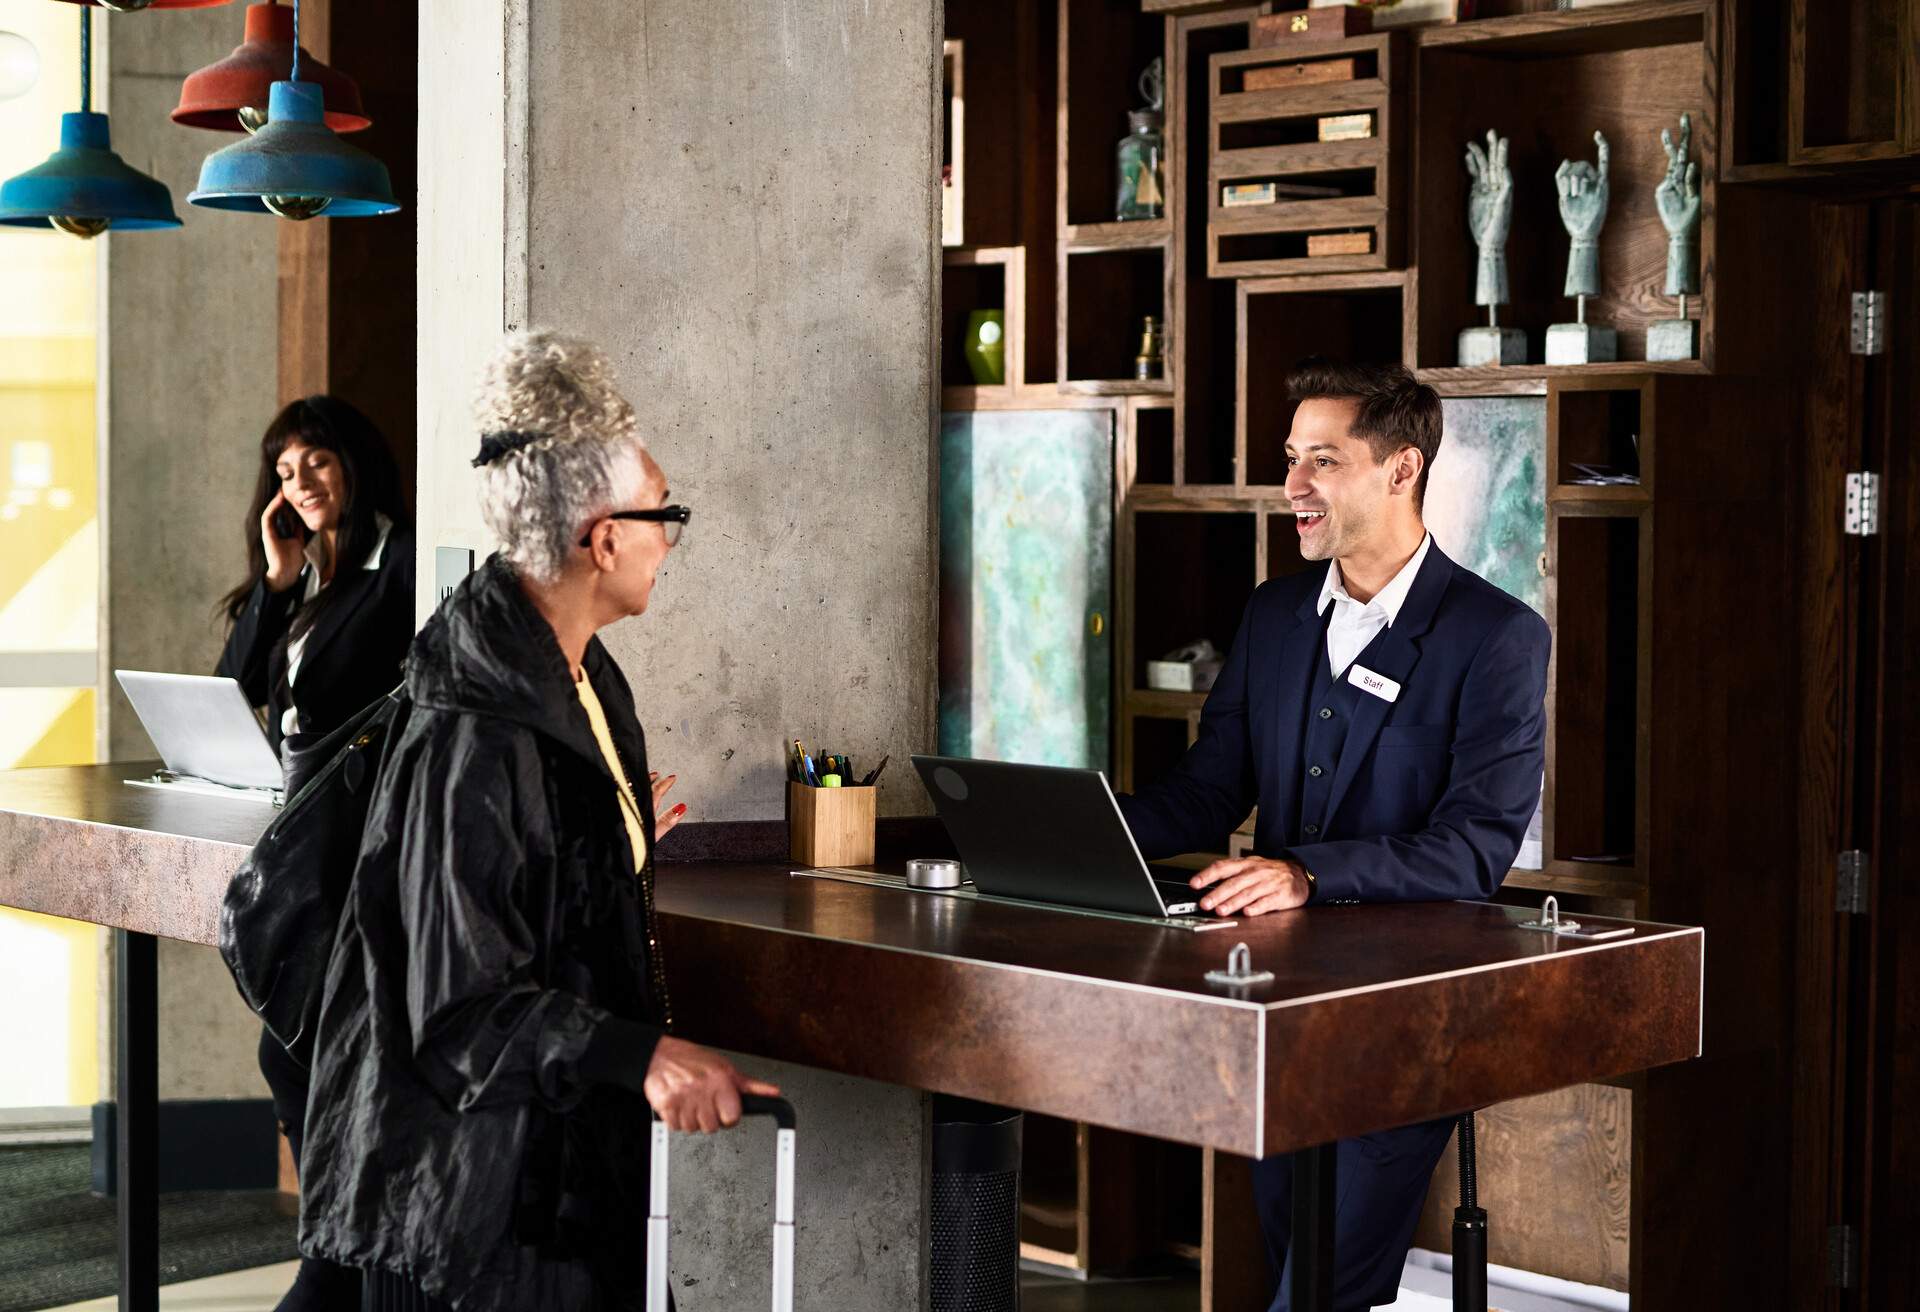 A male hotel receptionist in a navy blue suit talks to an elderly woman behind the counter.